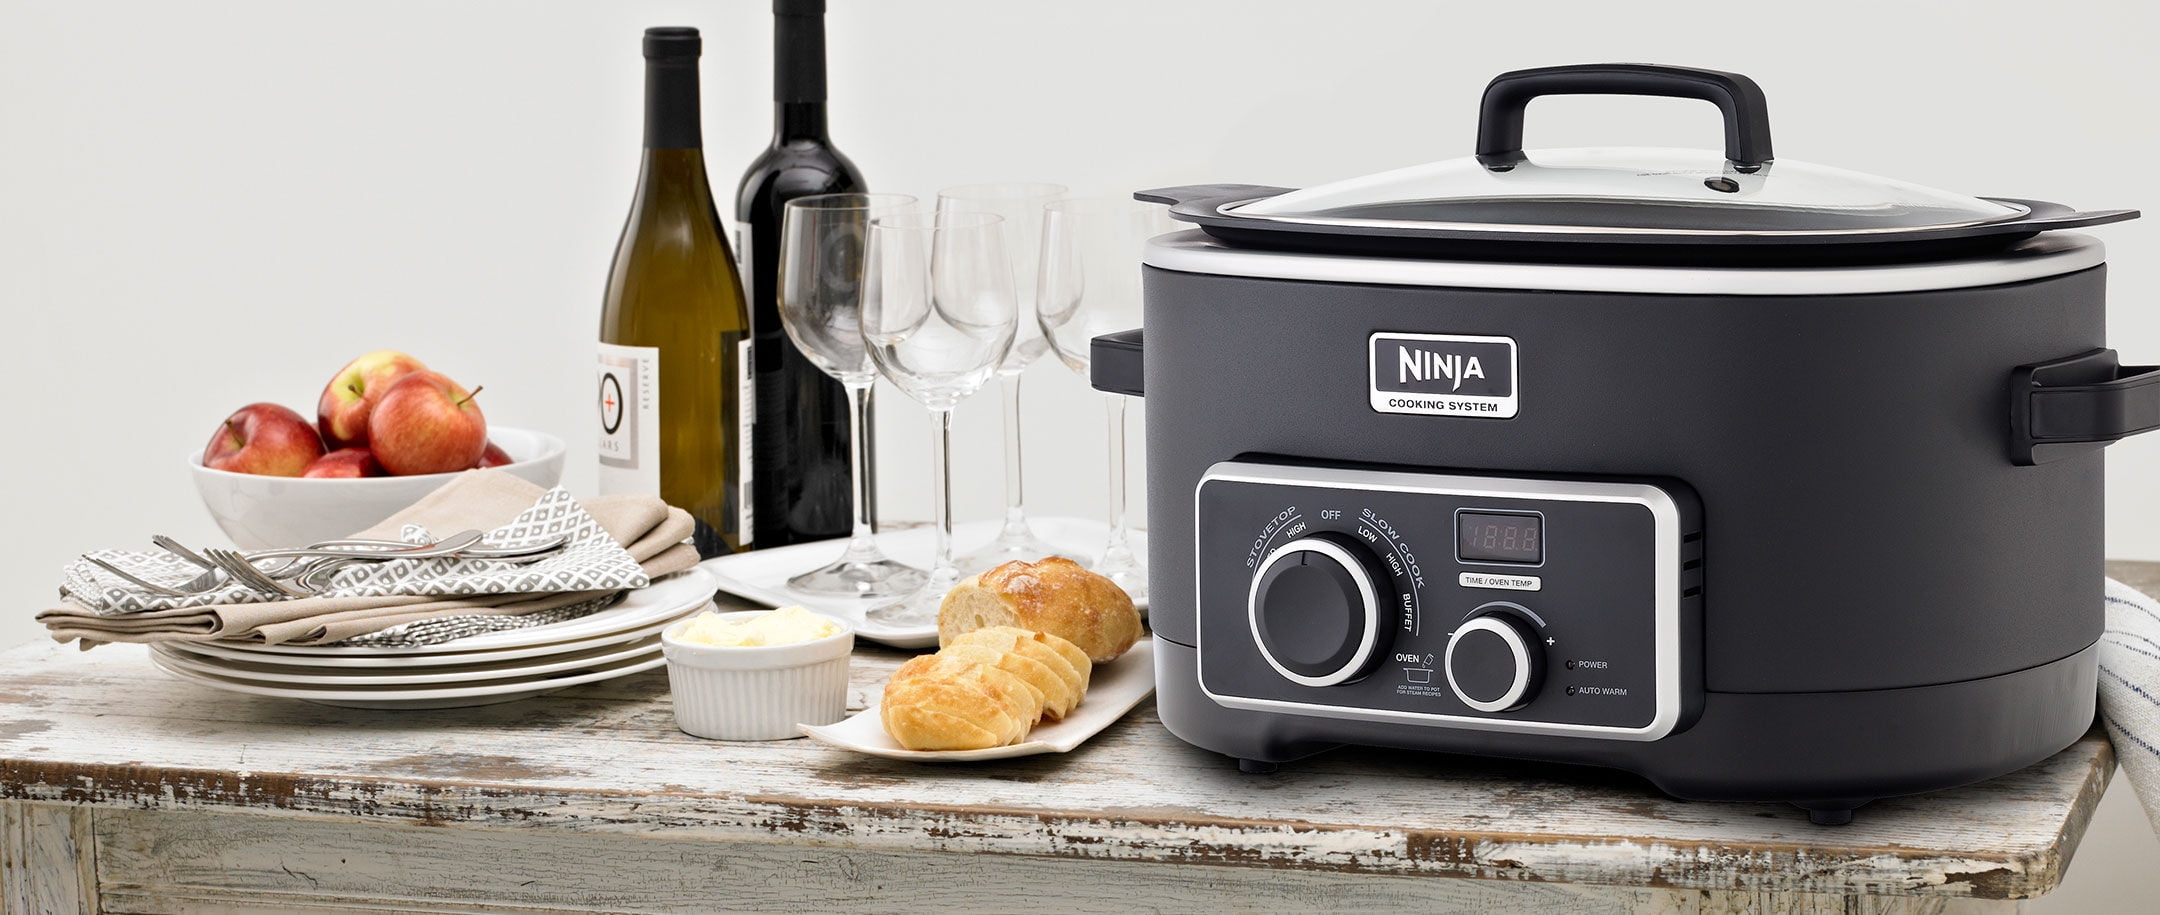 ninja 3-in-1 cooking system